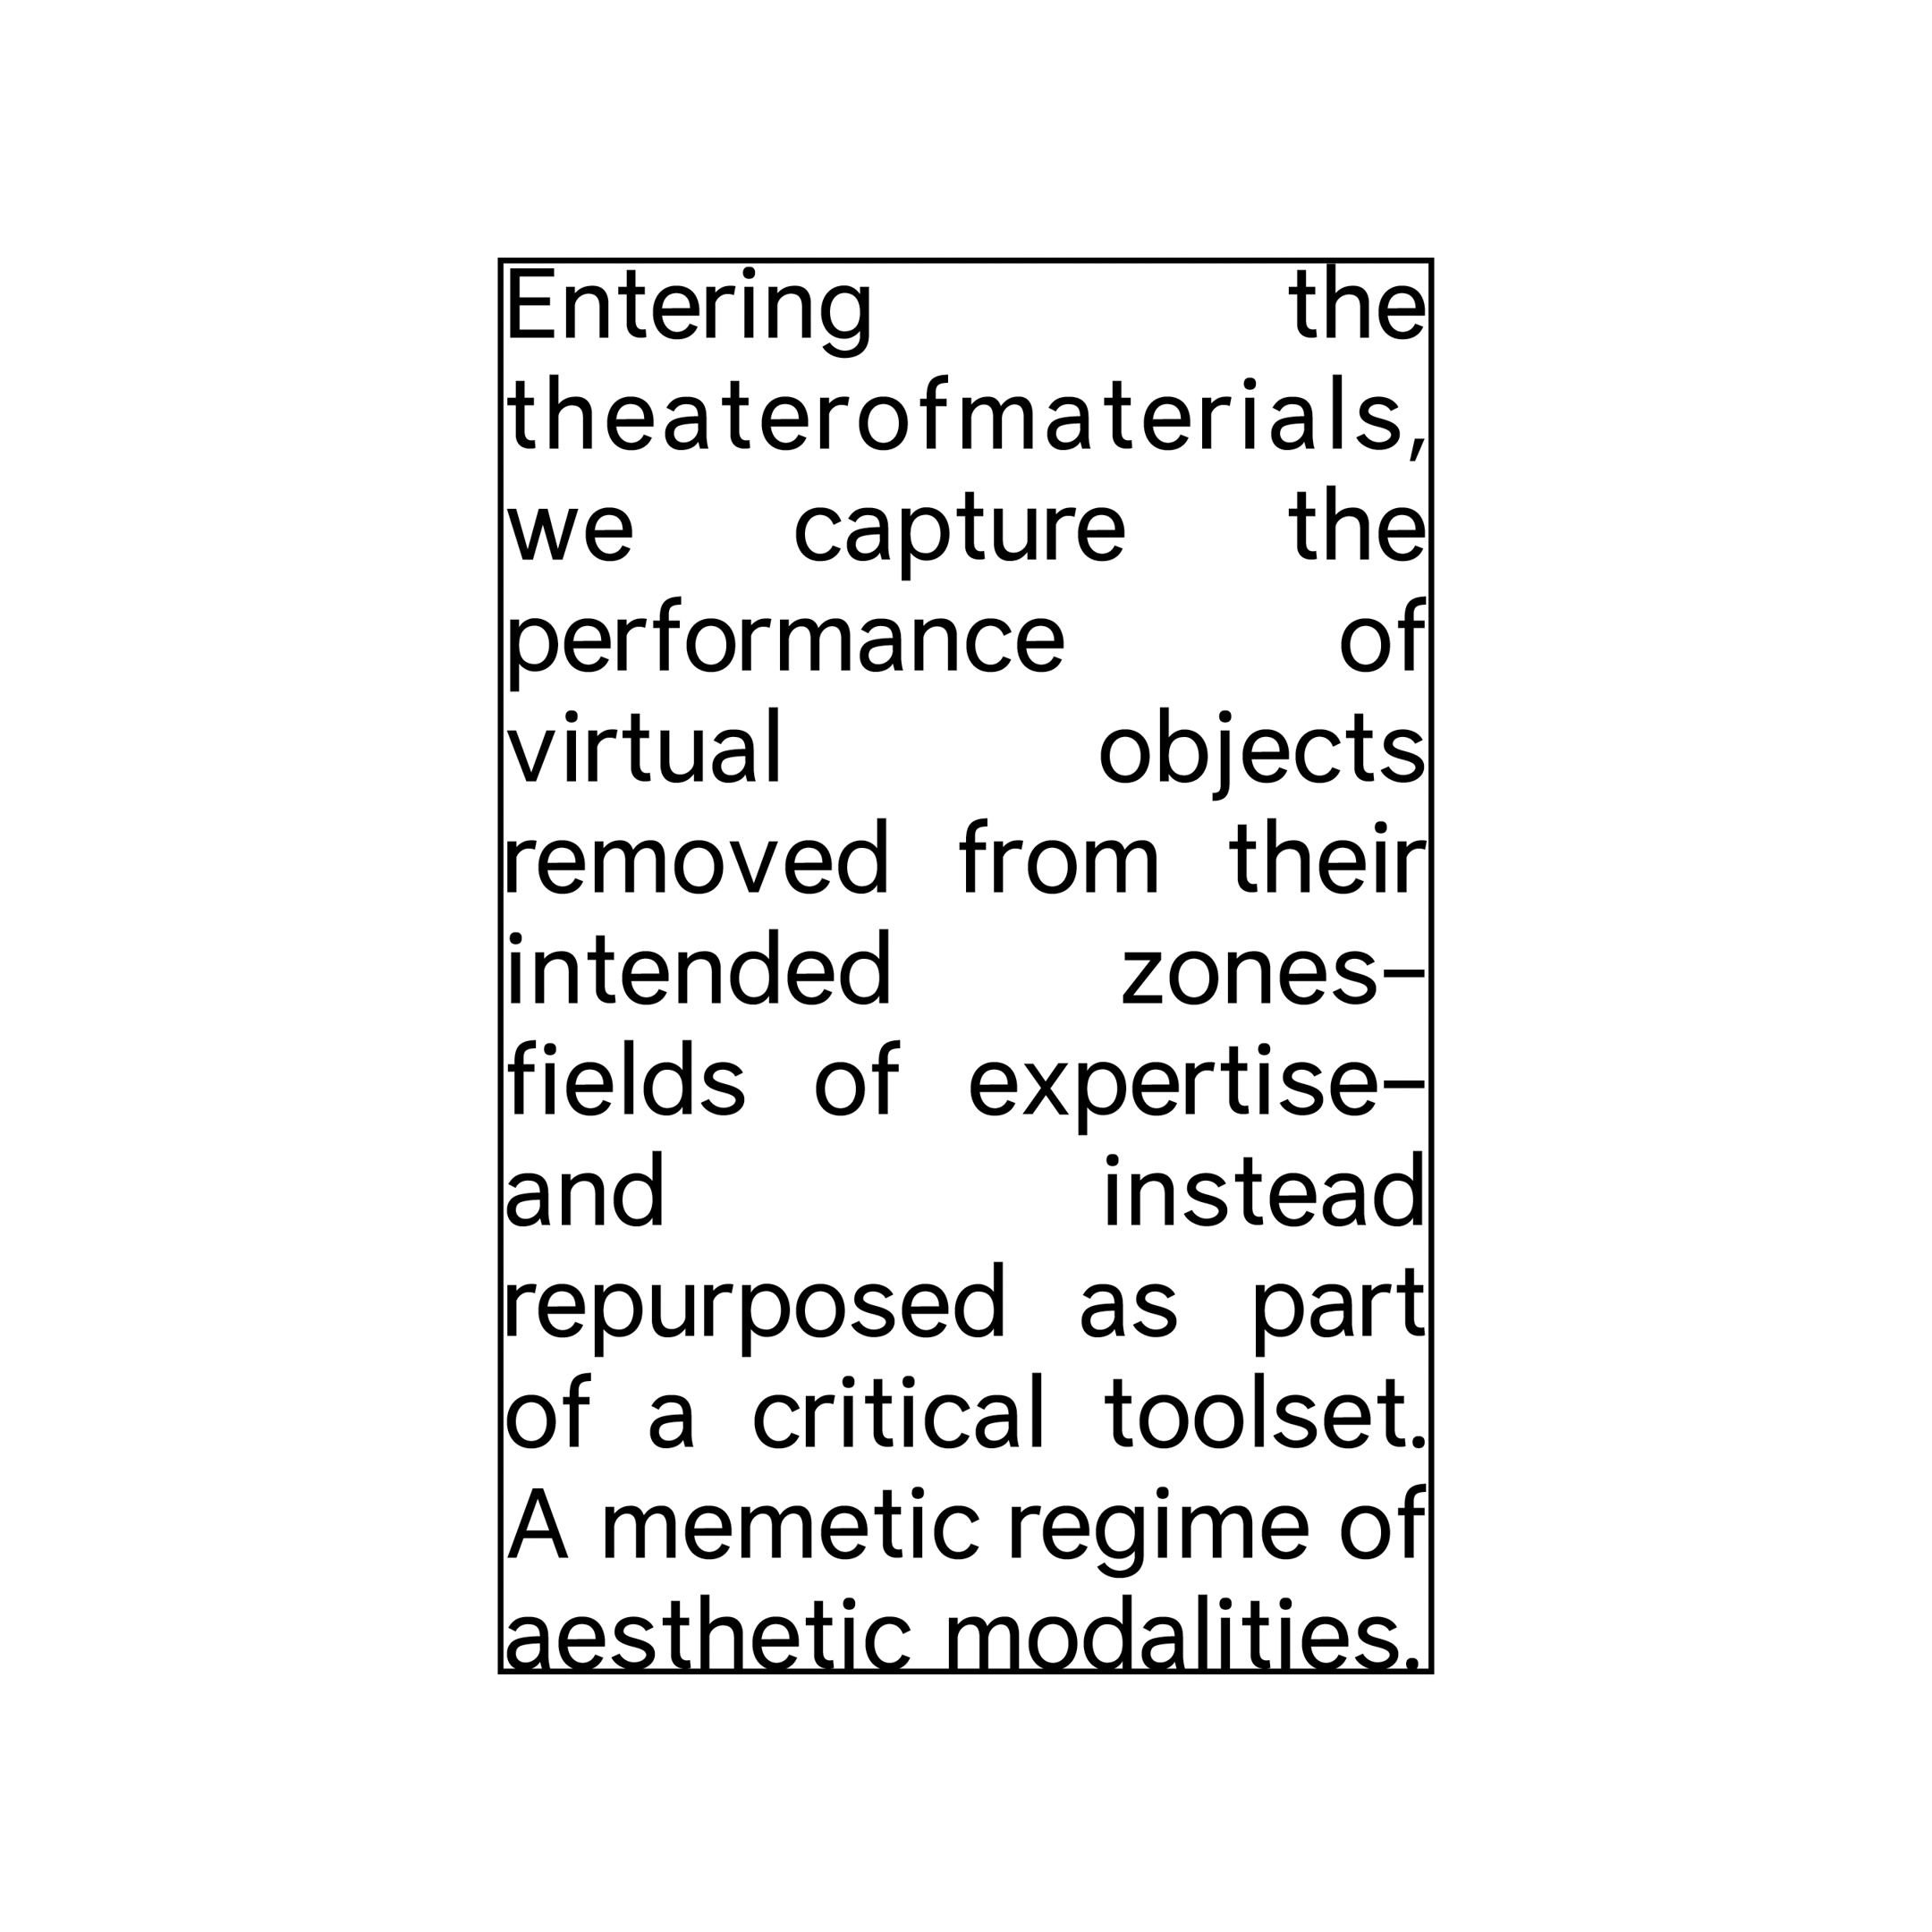 Theater of Materials by Mike Corrao ~ Image 1